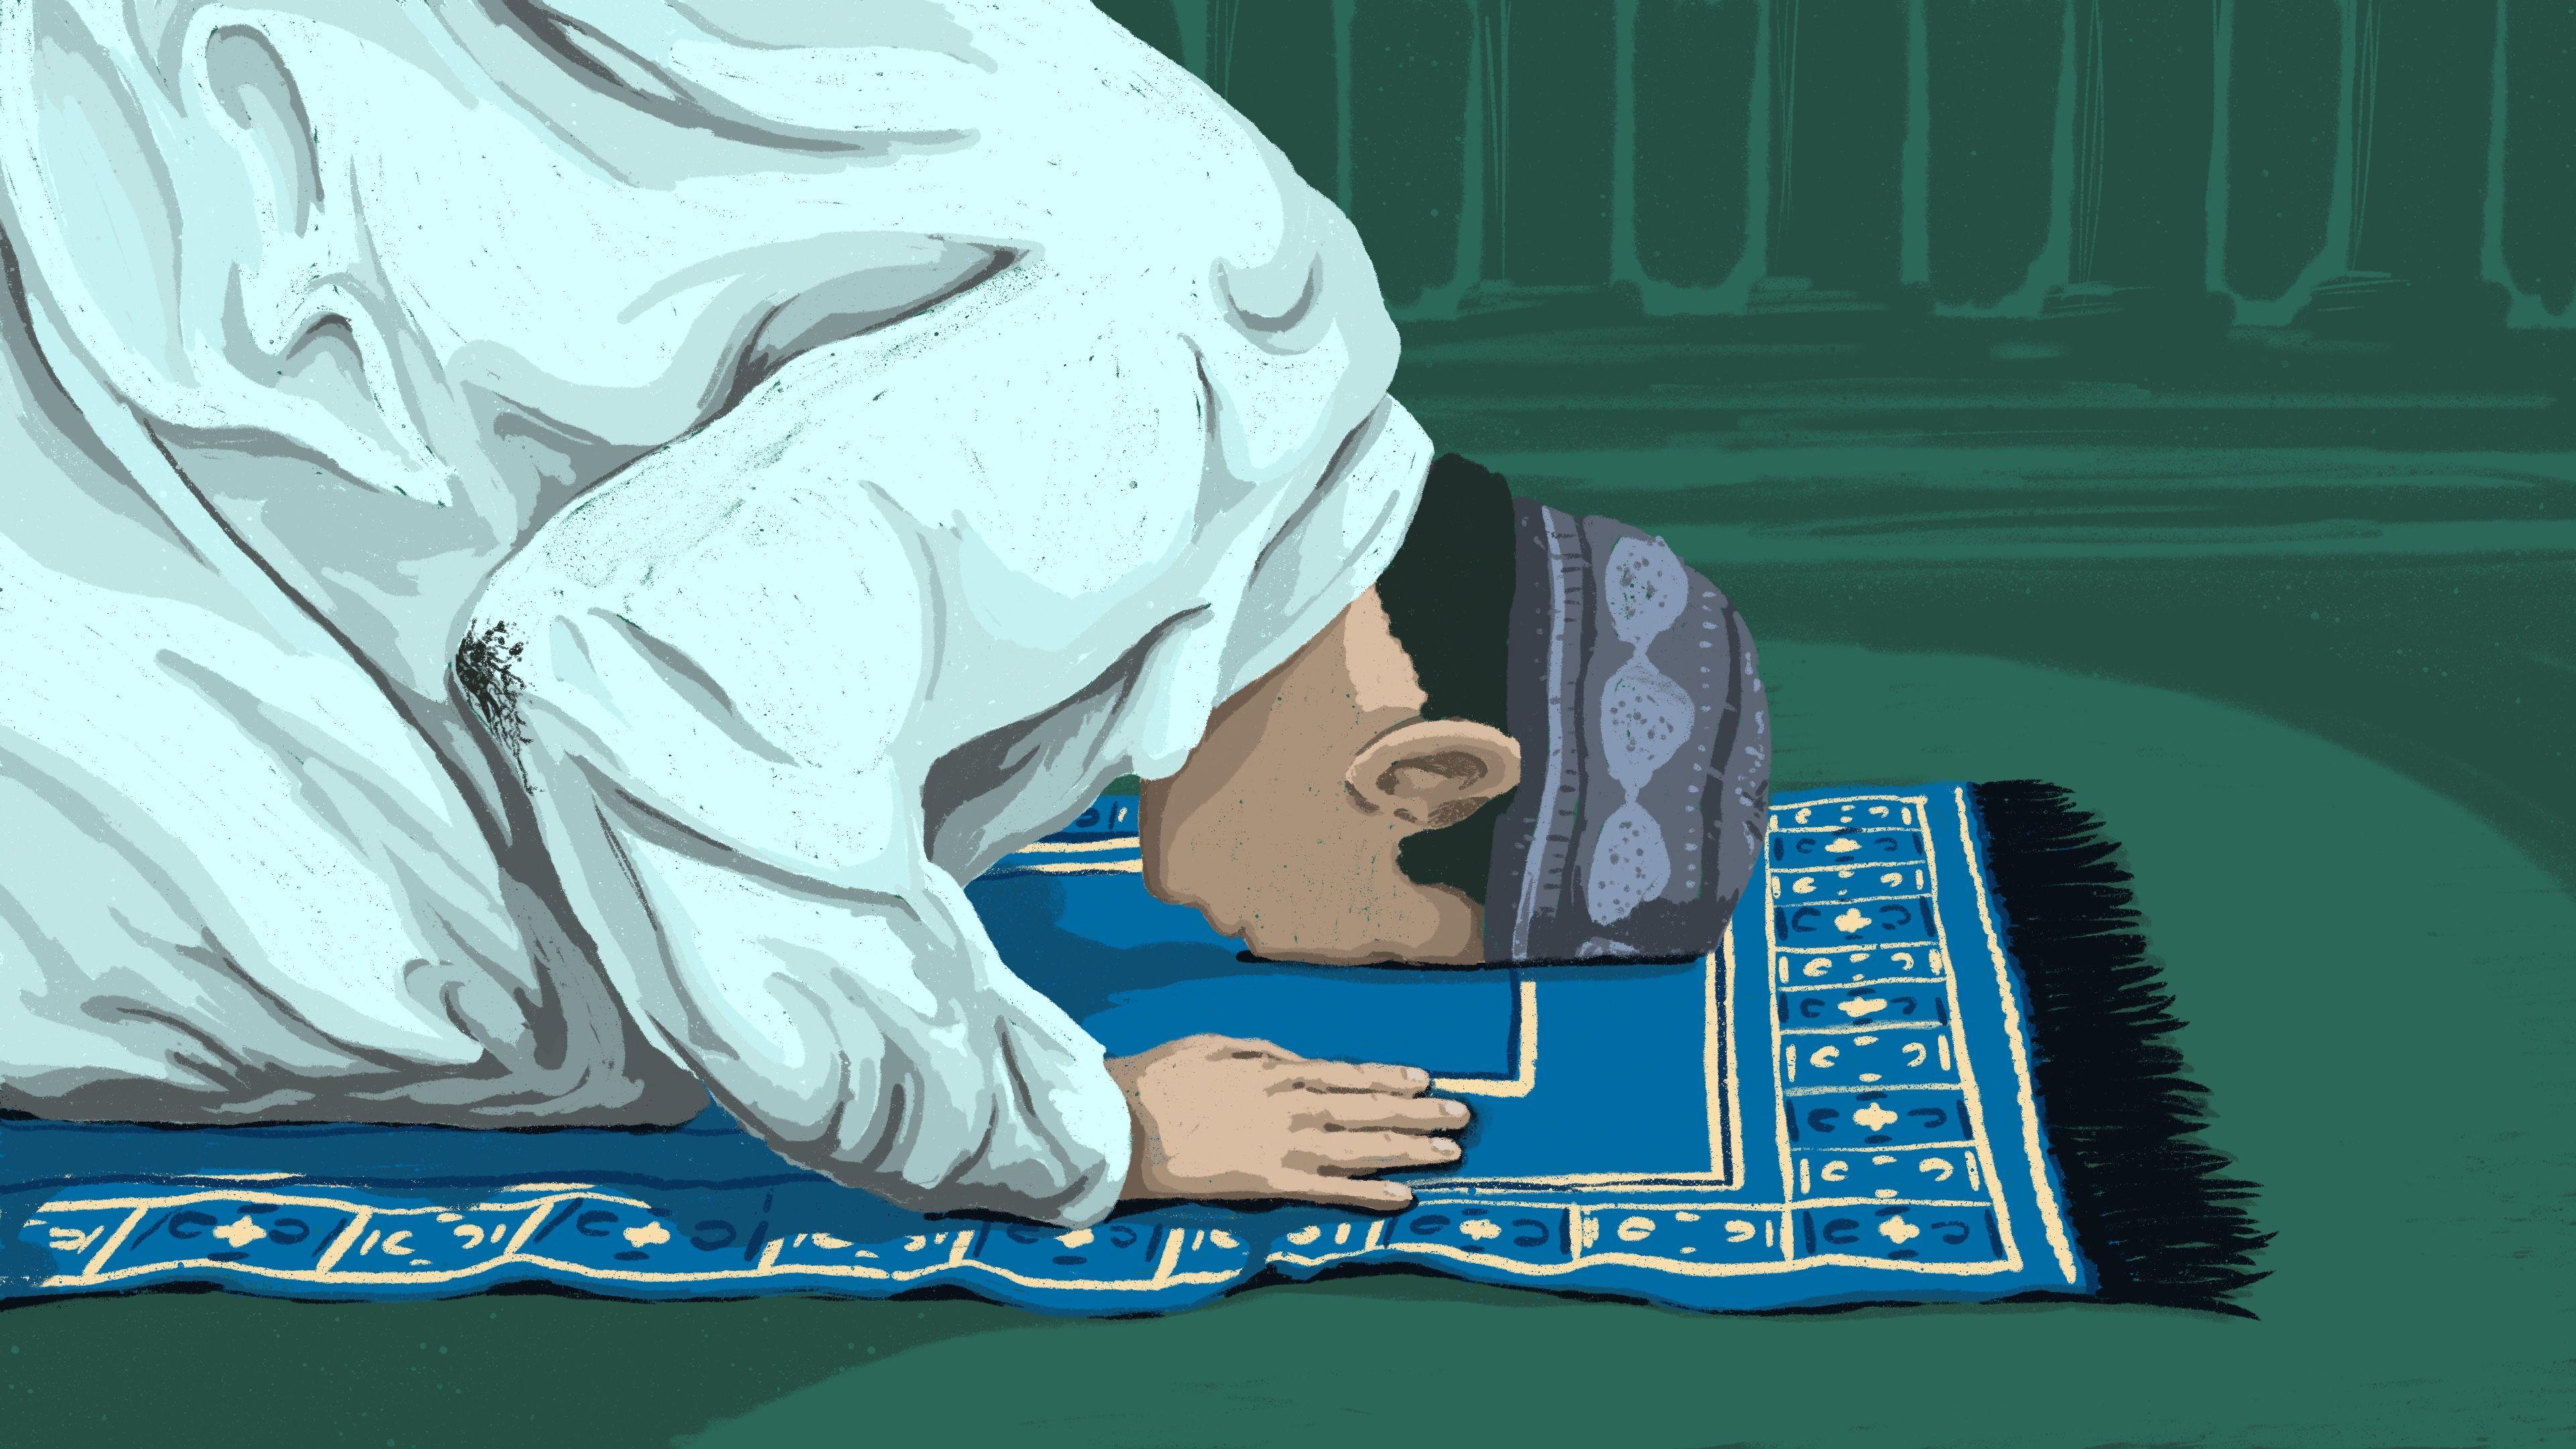 The Posture of Prayer: A Look at How Muslims Pray